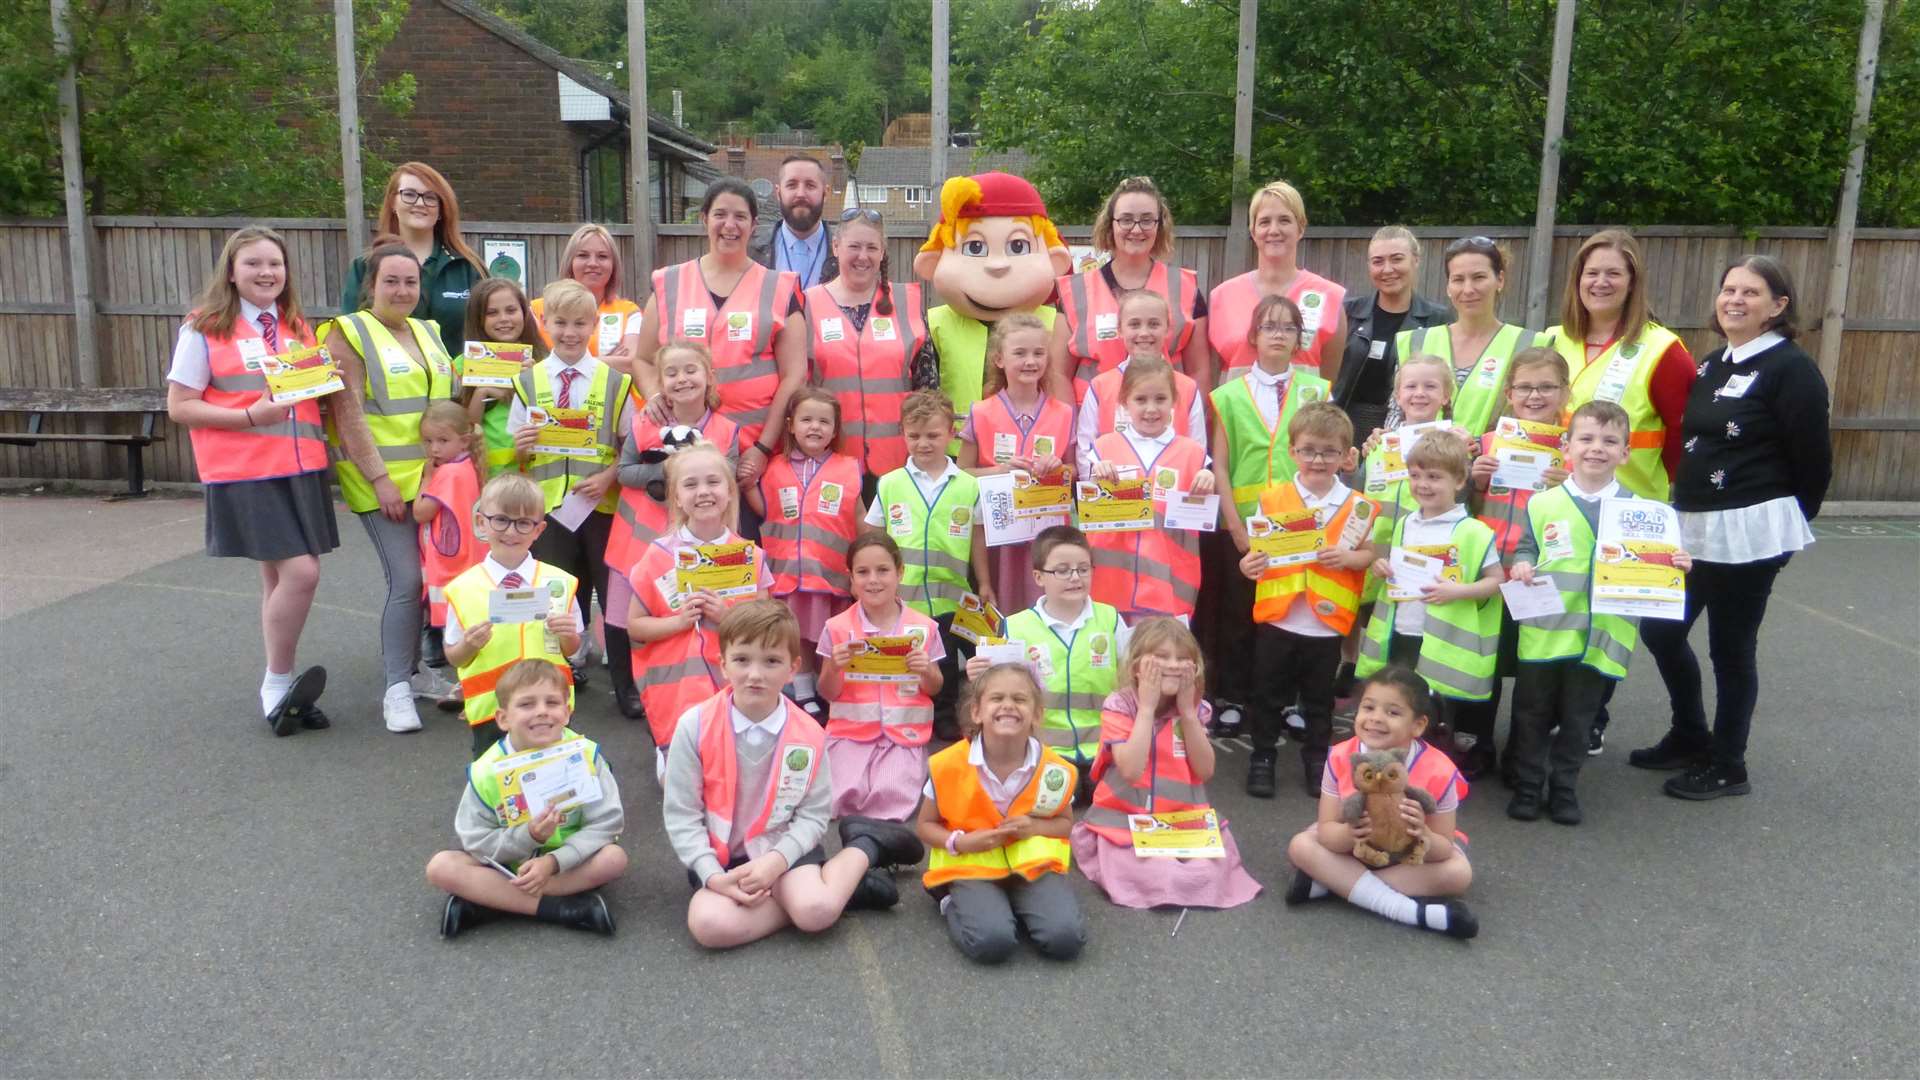 KM Walk to School campaign mascot Sam joins Walderslade Primary and supporters at relaunch of the school's walking buses.